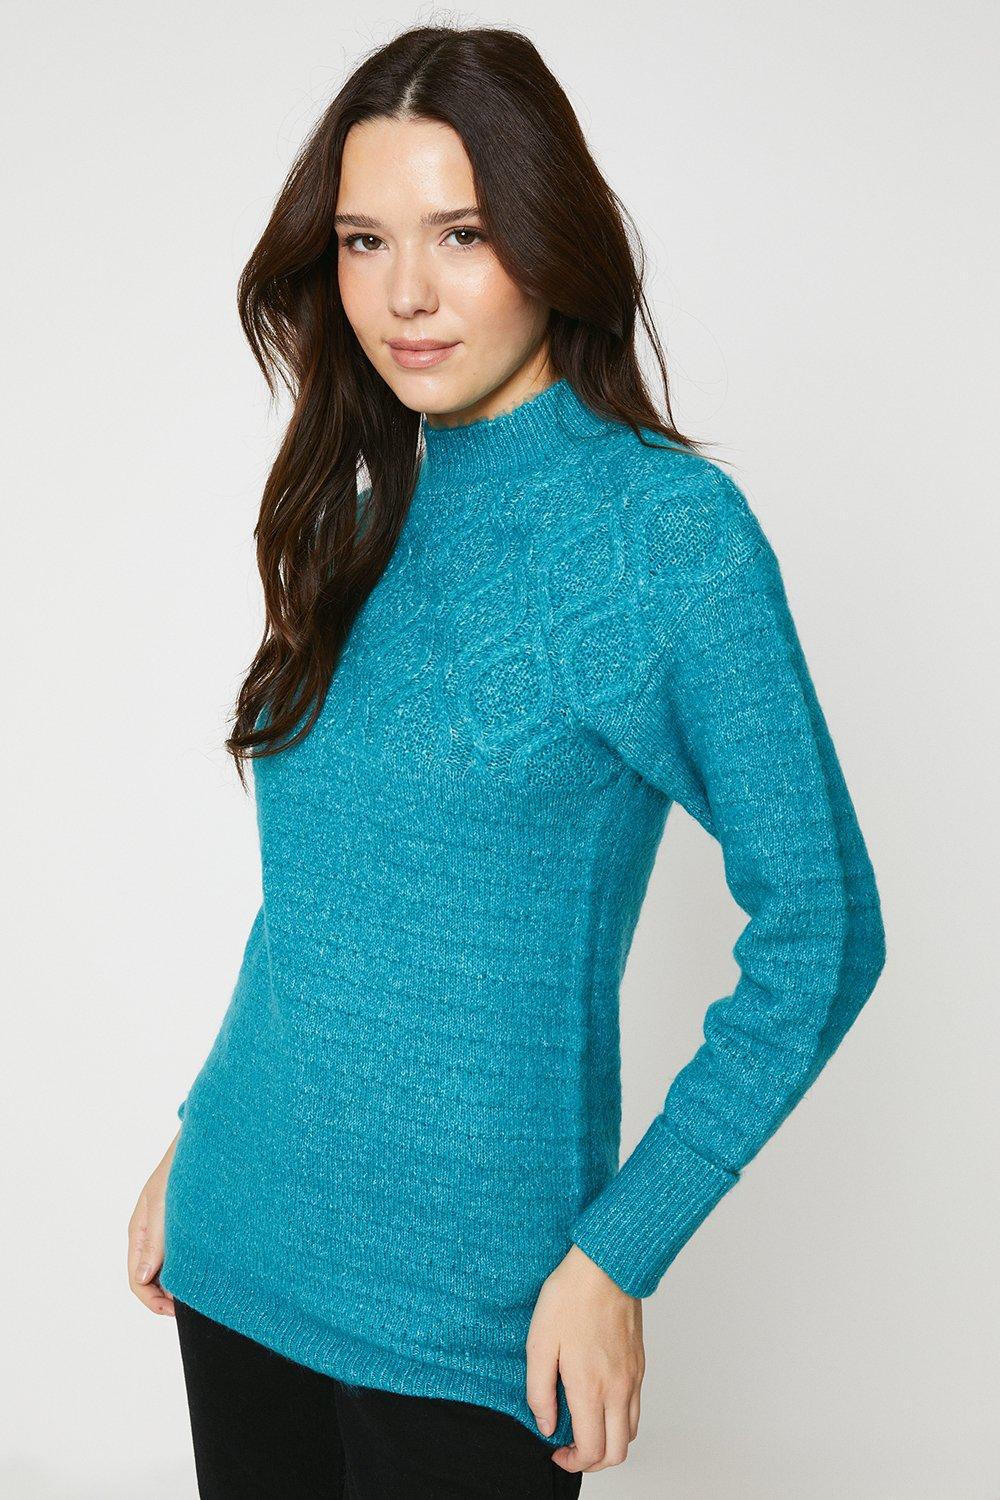 Women’s Mix Cable Stitch Longline Knitted Tunic - green - M